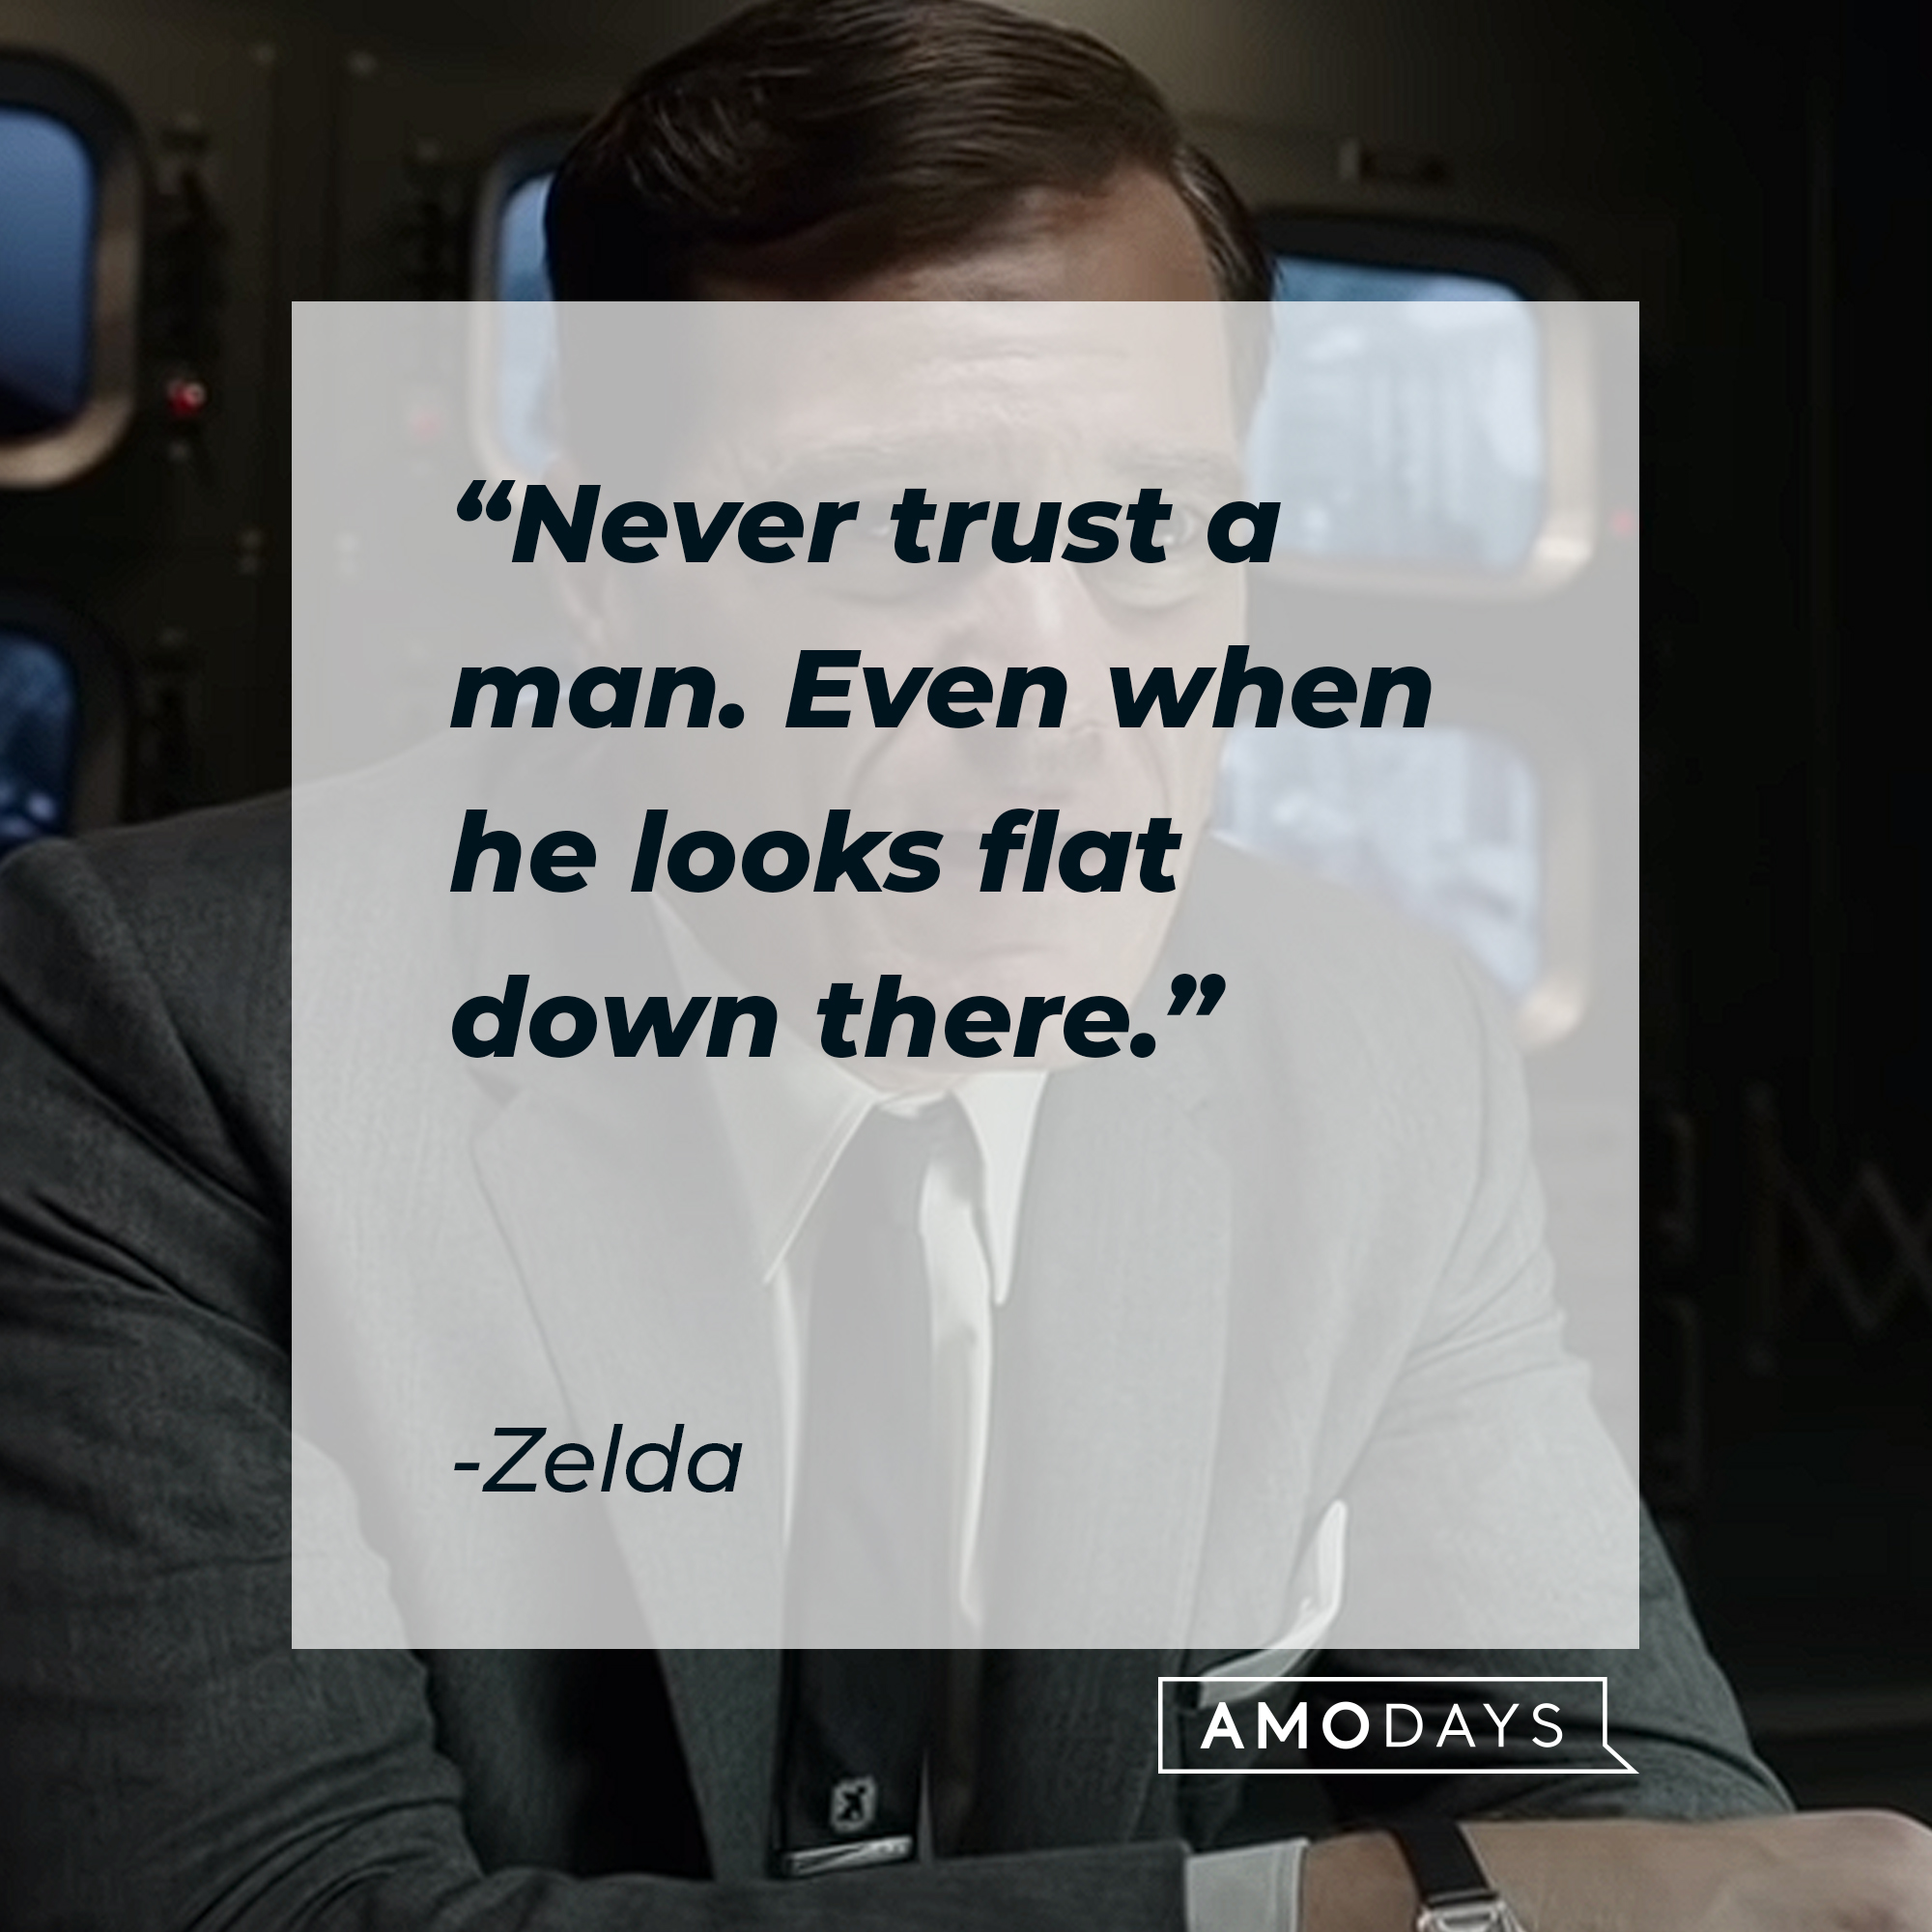 Zelda's quote : "Never trust a man. Even when he looks flat down there." | Source:youtube.com/searchlightpictures